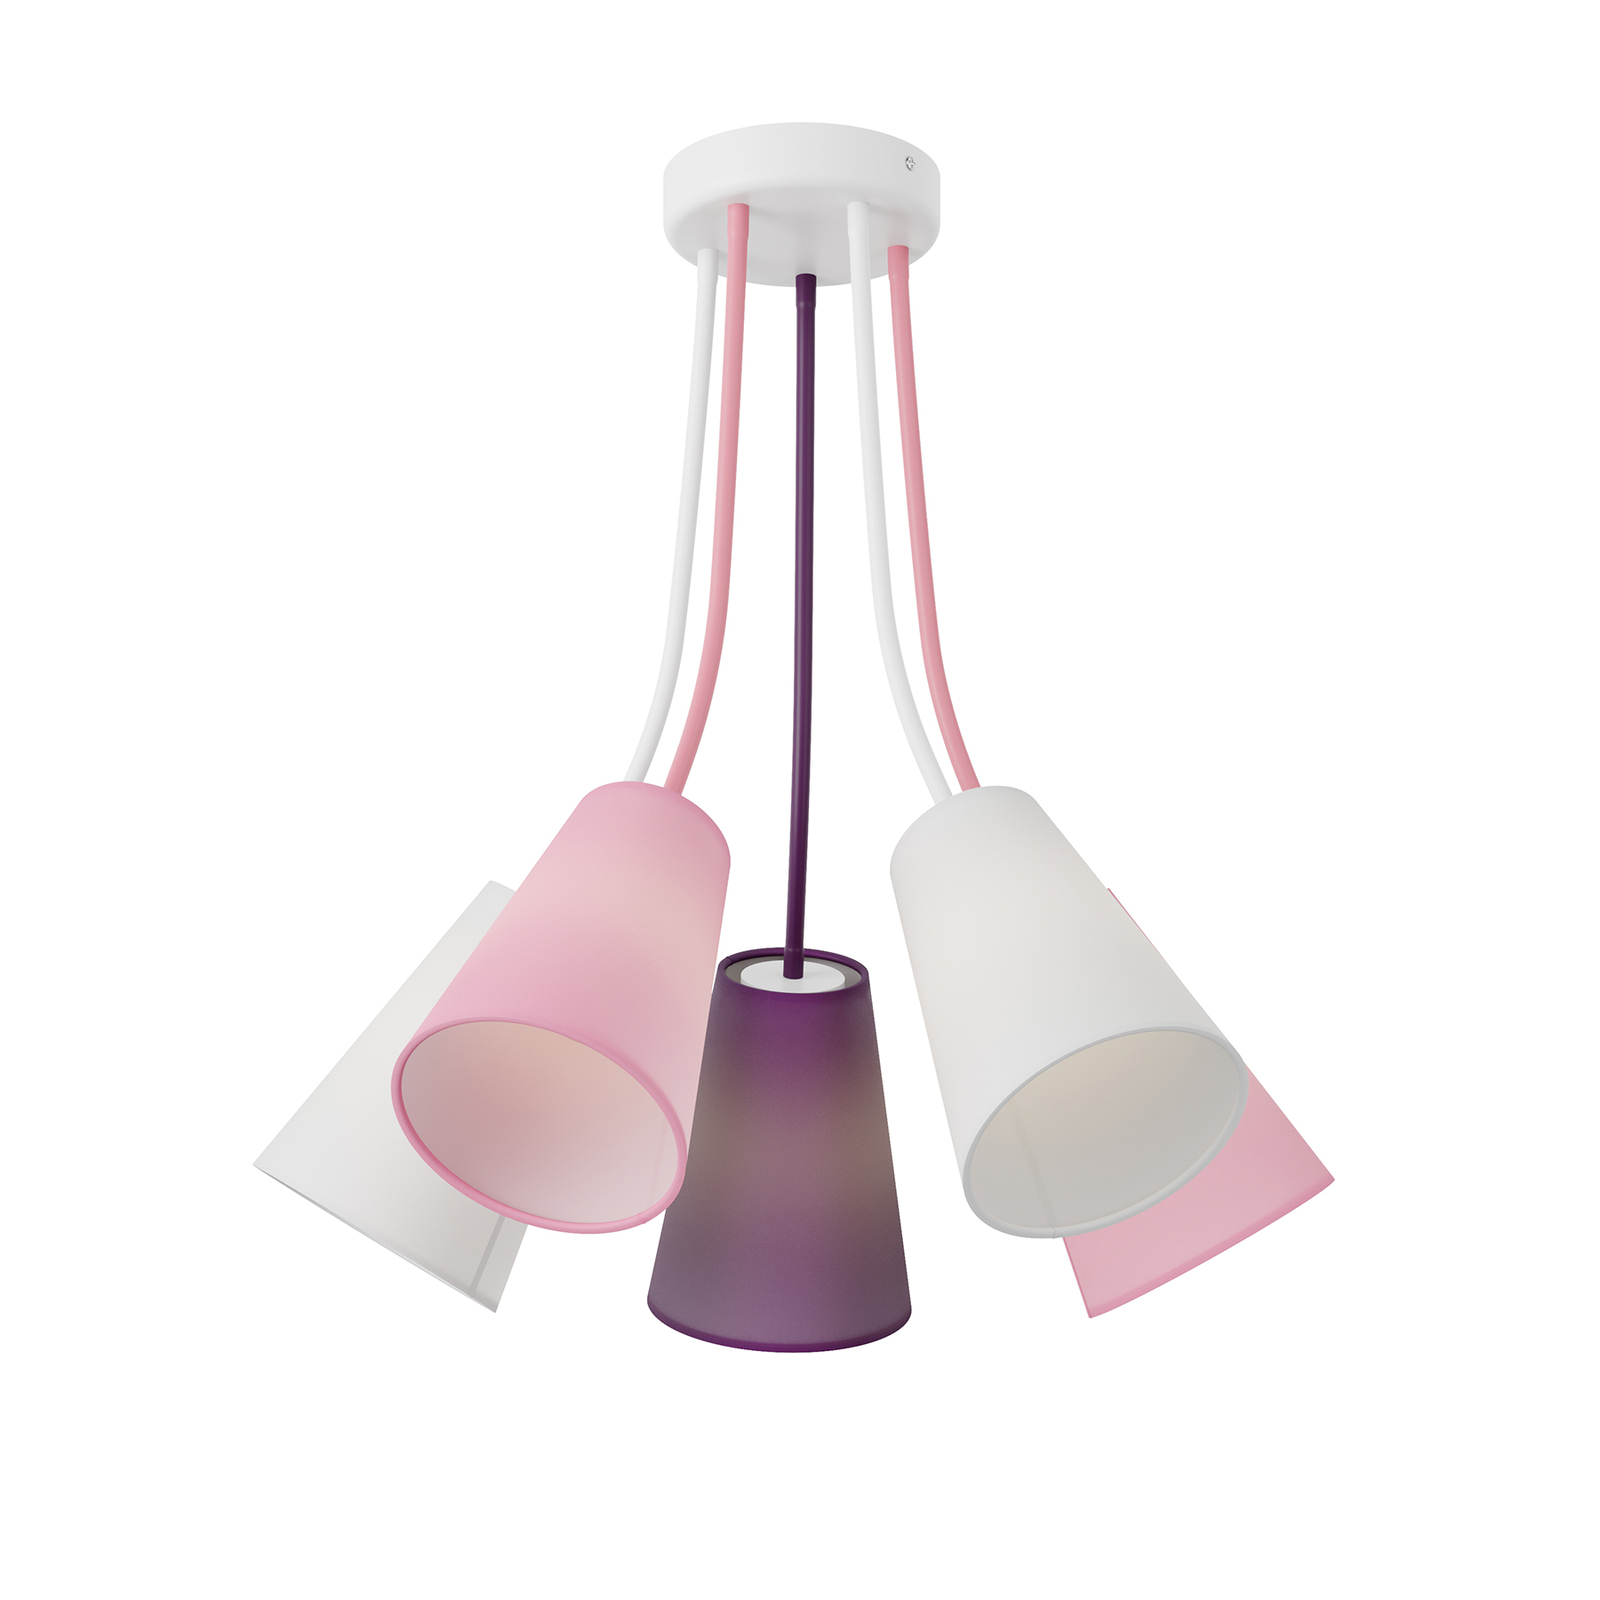 Wire Kids 5-bulb ceiling lamp, white/pink/purple